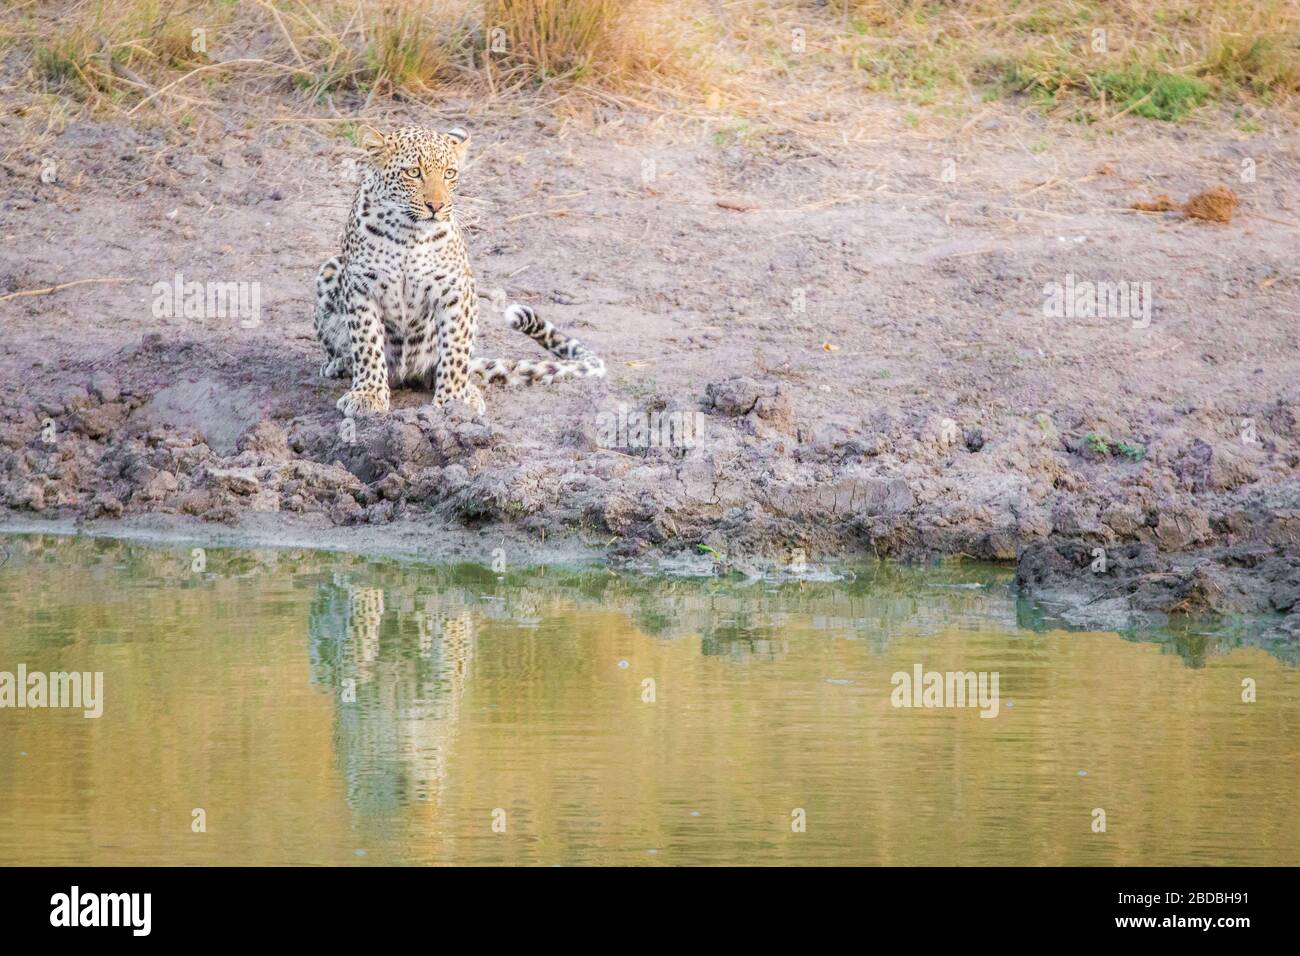 Leopard Leopards drinking kruger south africa Stock Photo